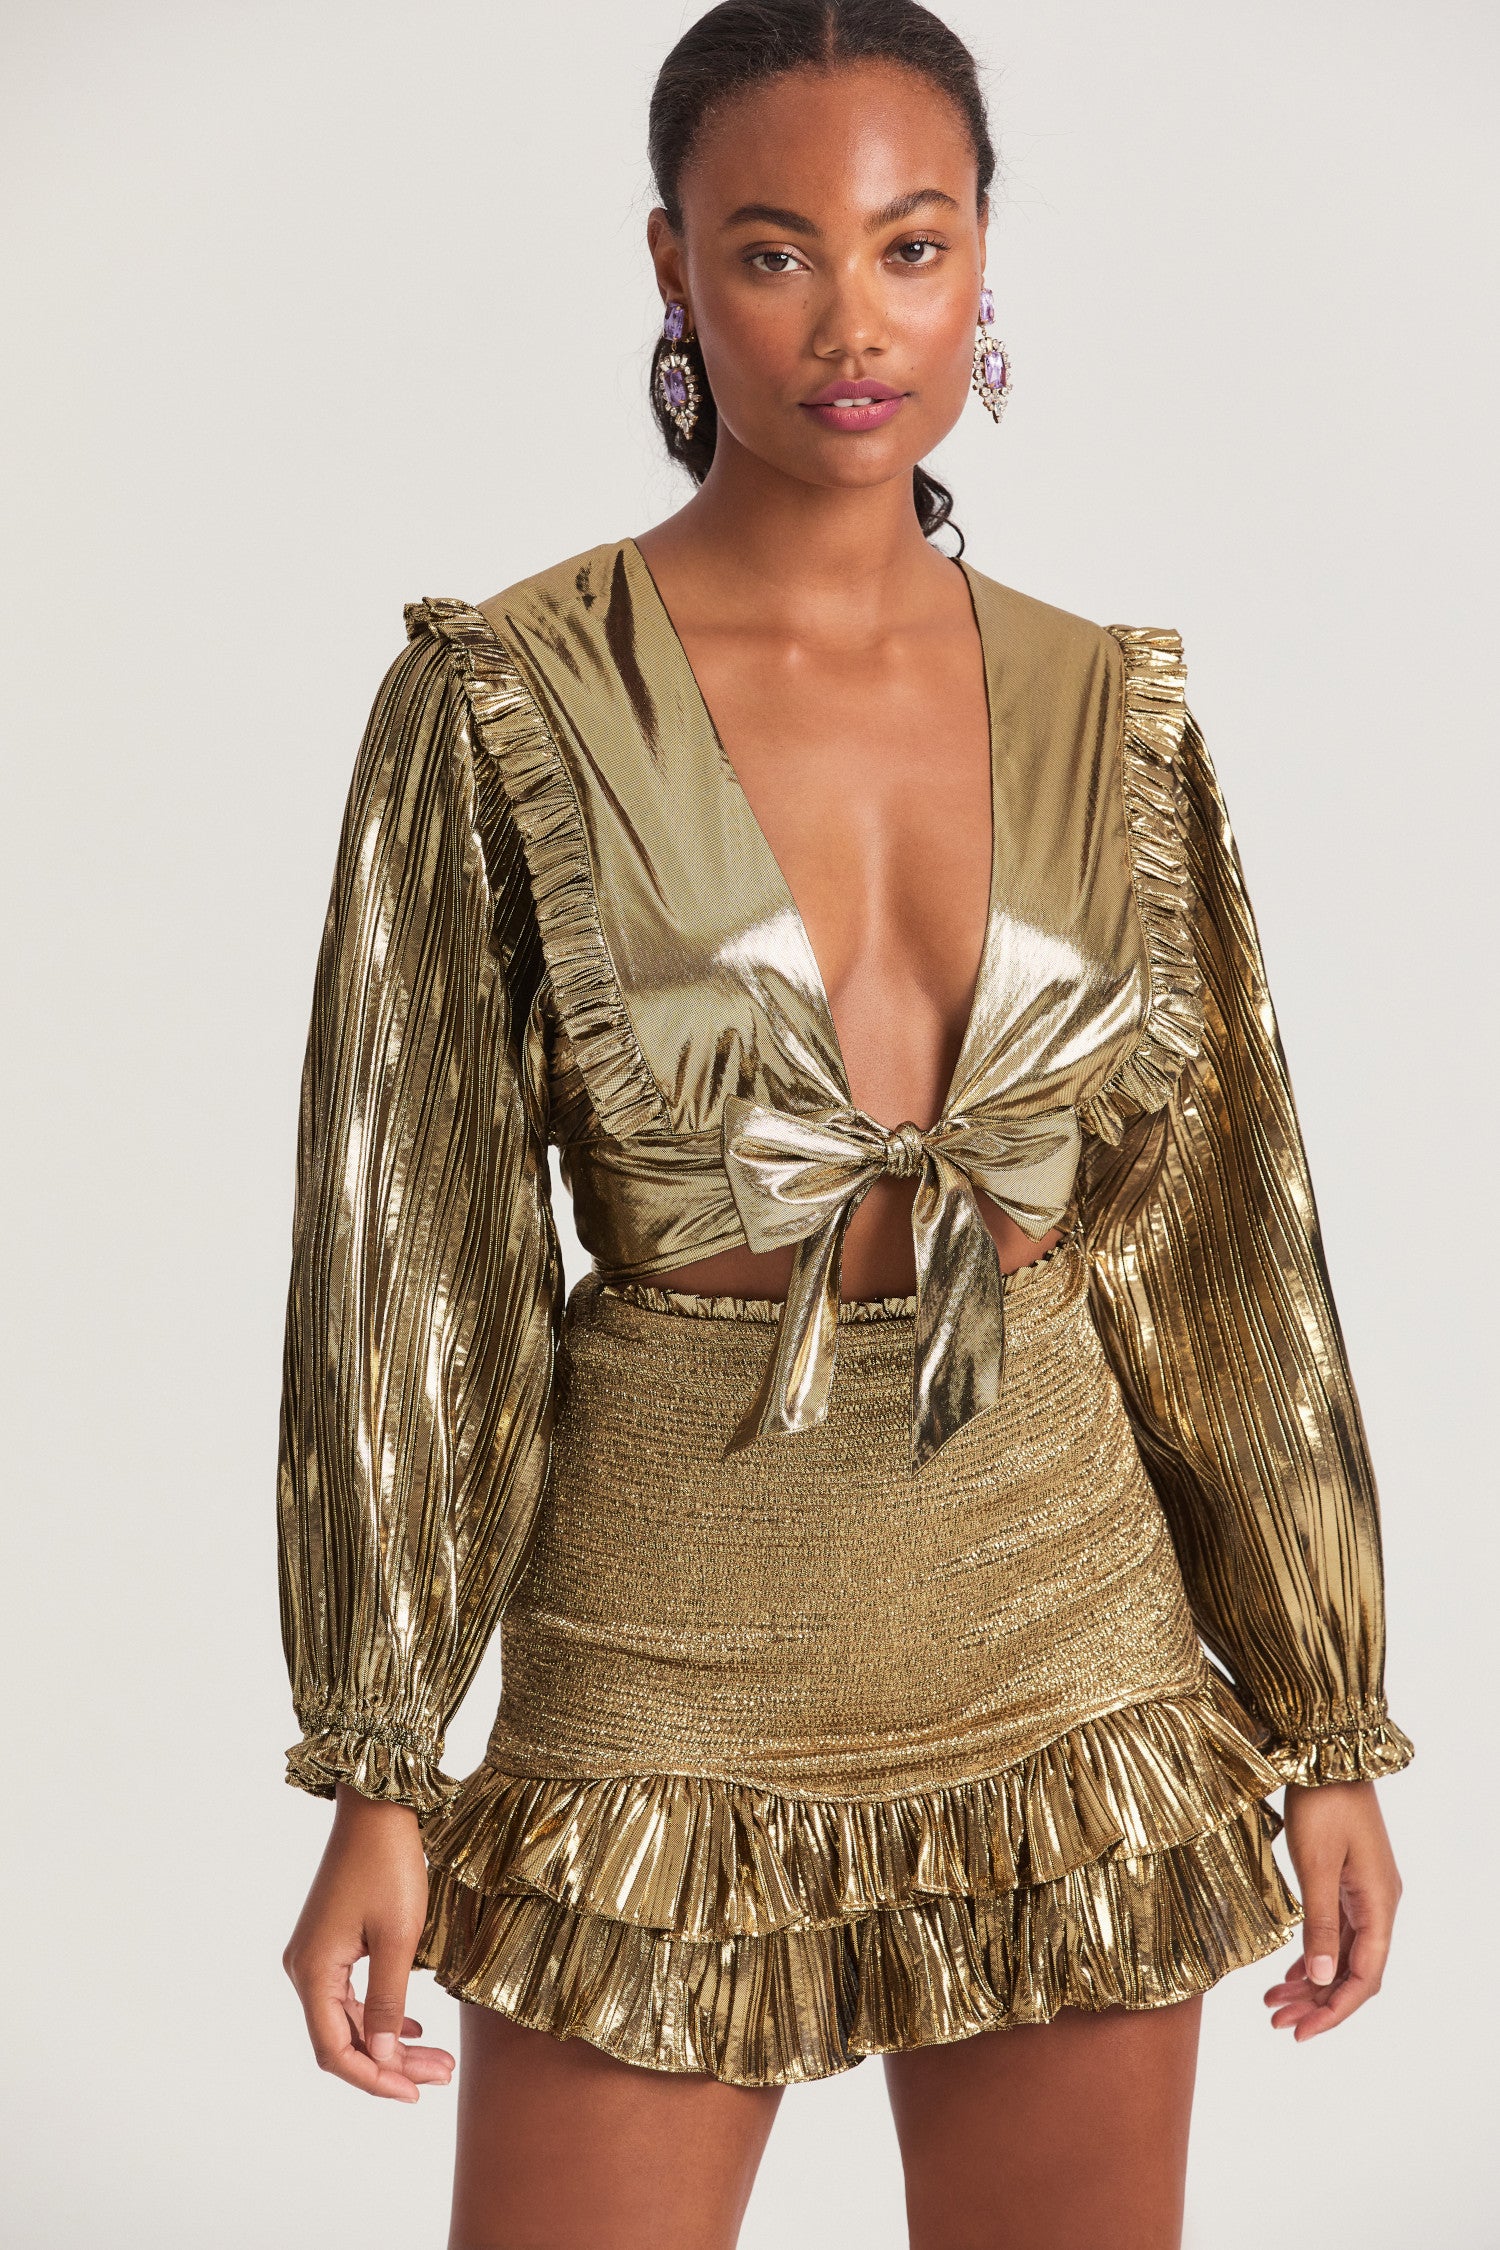 Gold crop top made of mixture of a shiny flat and pleated lame fabric. Pleated ruffles adorn the shoulders with a functional tie detail at the front. 